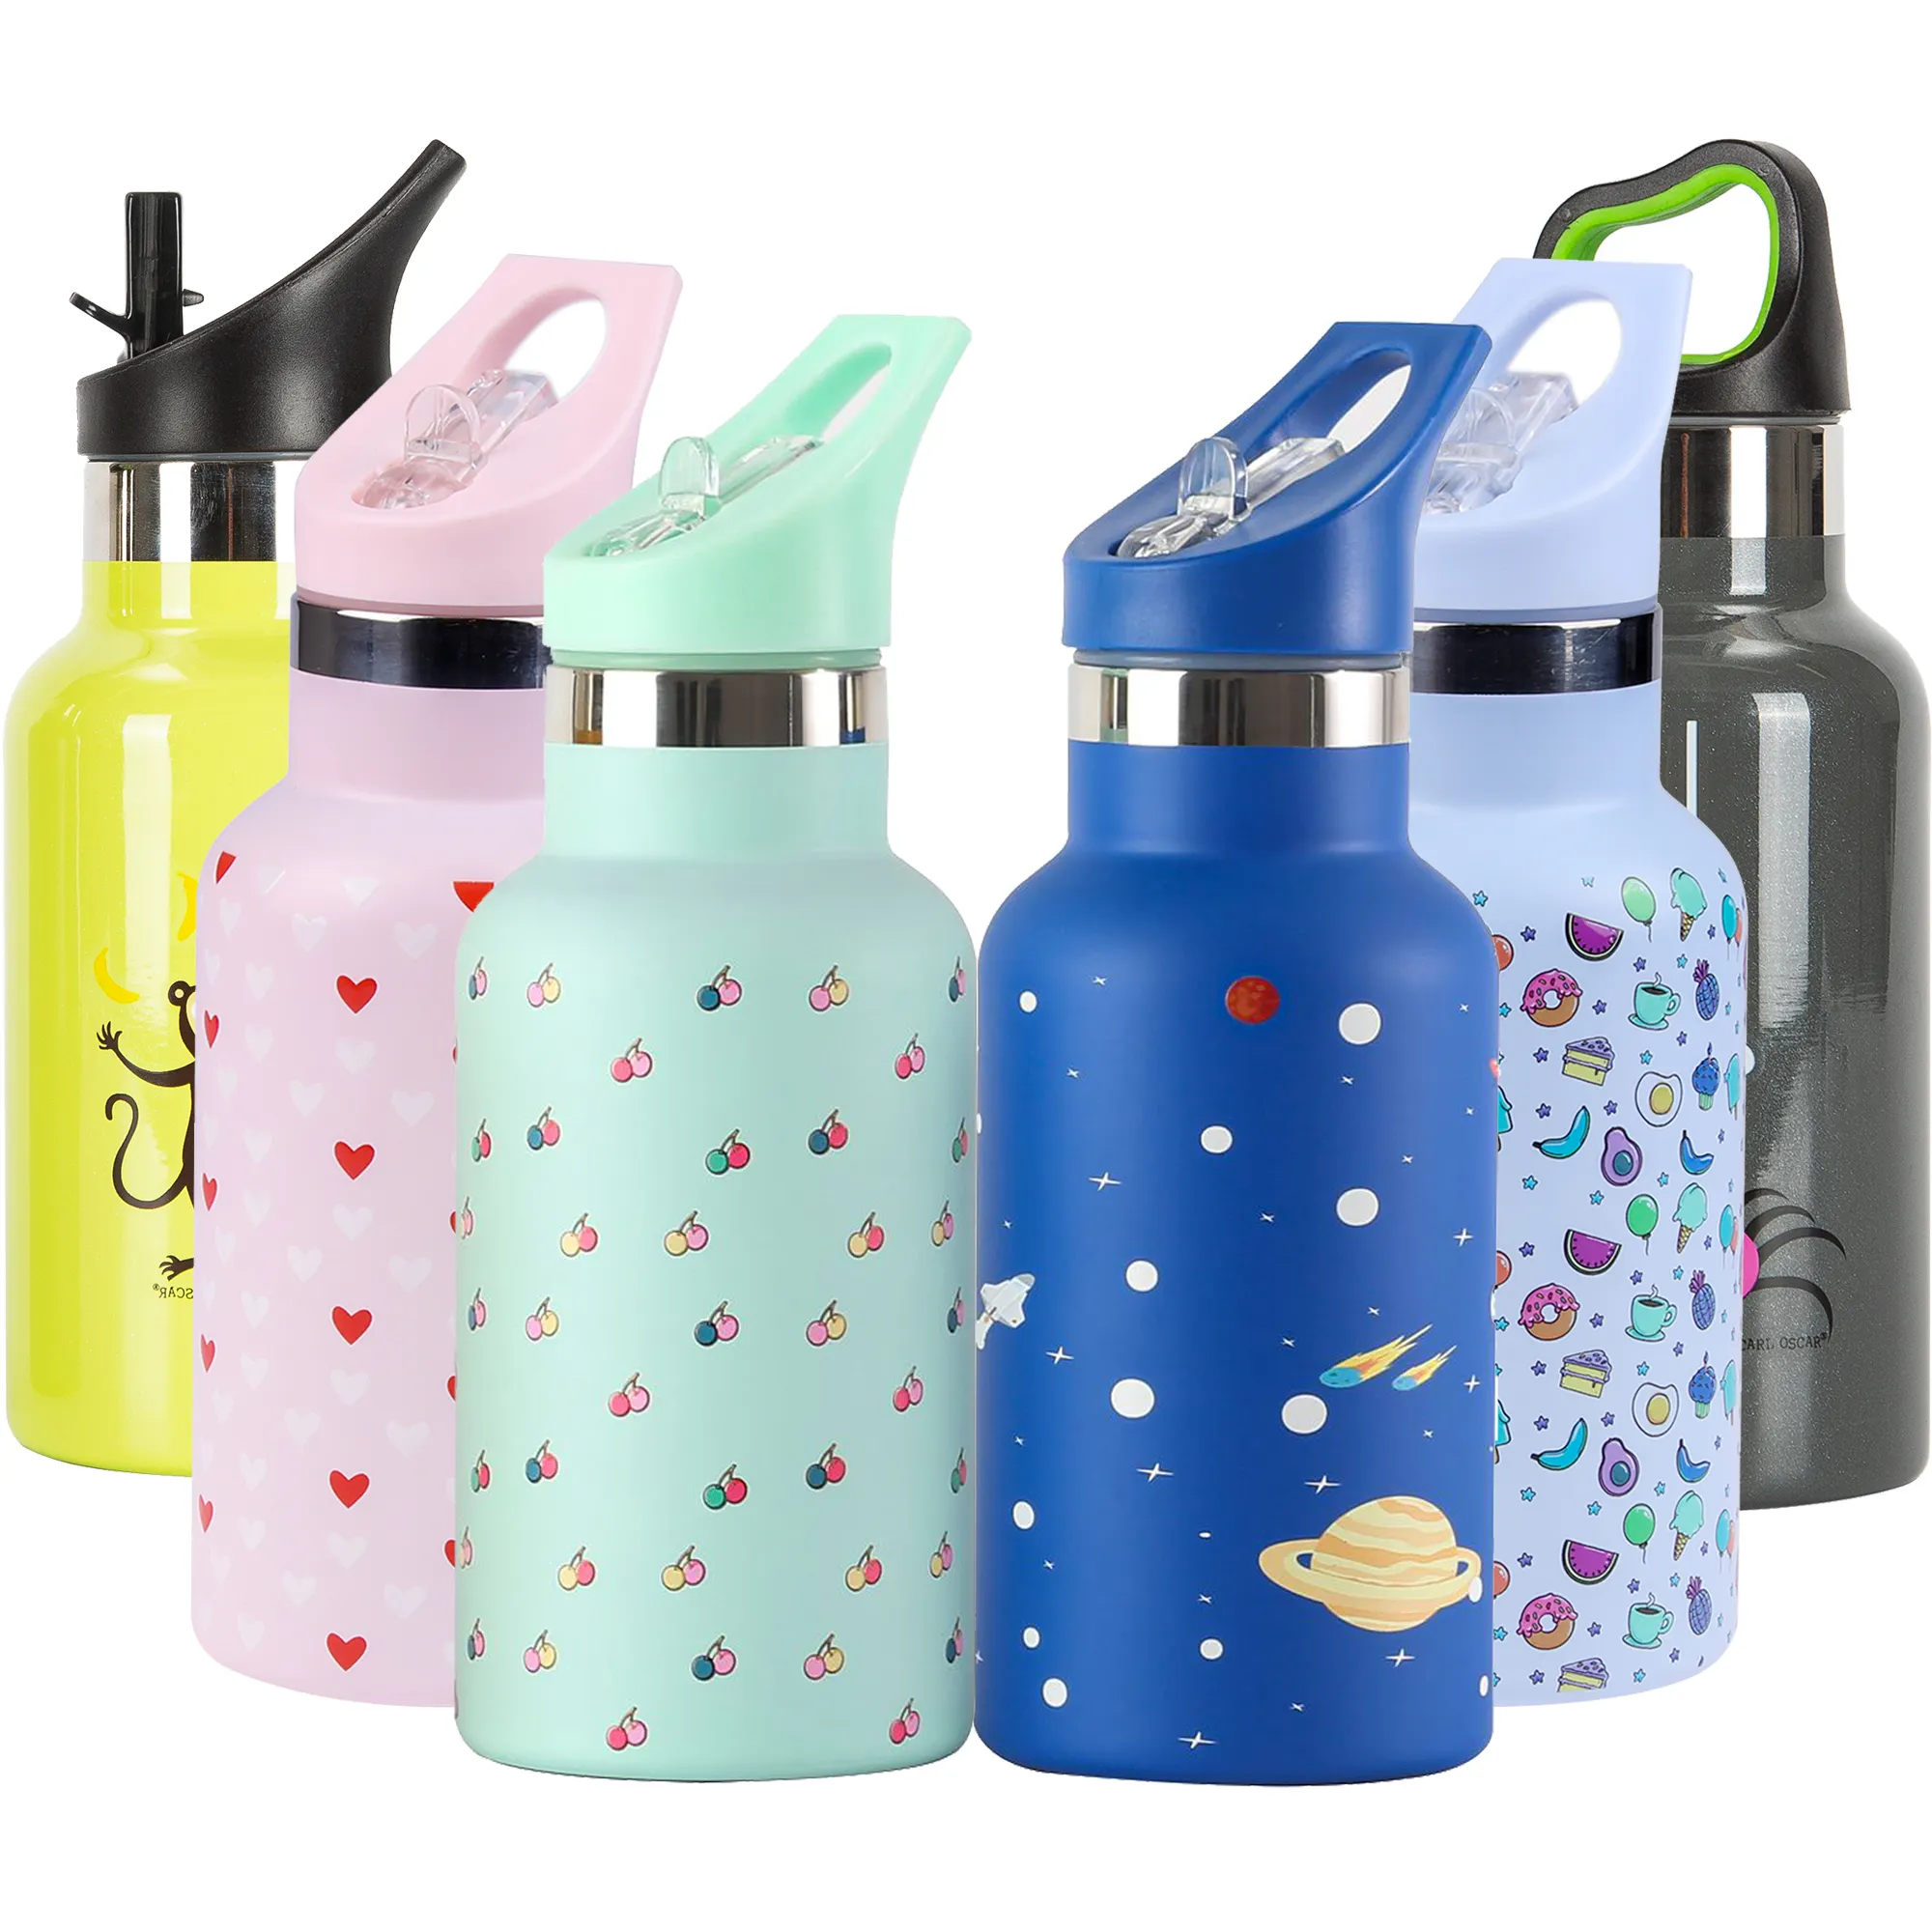 Personalized 12oz Stainless Steel Kids children drinking water bottles with straw